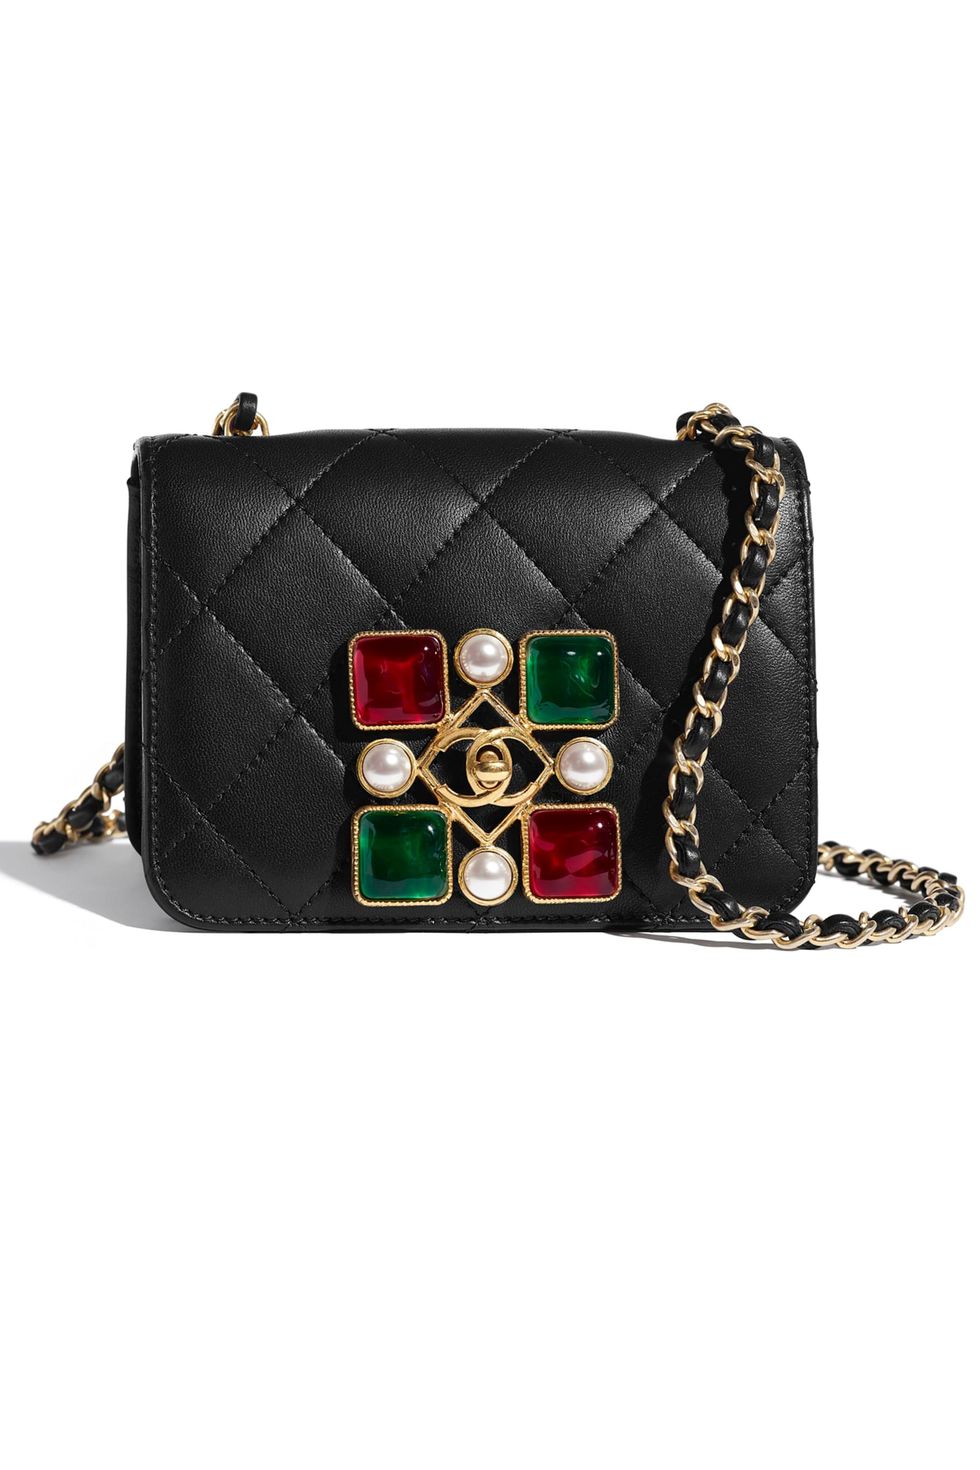 5 Reasons Why the Dolce & Gabbana Sicily Bag is Your Next Bag Crush